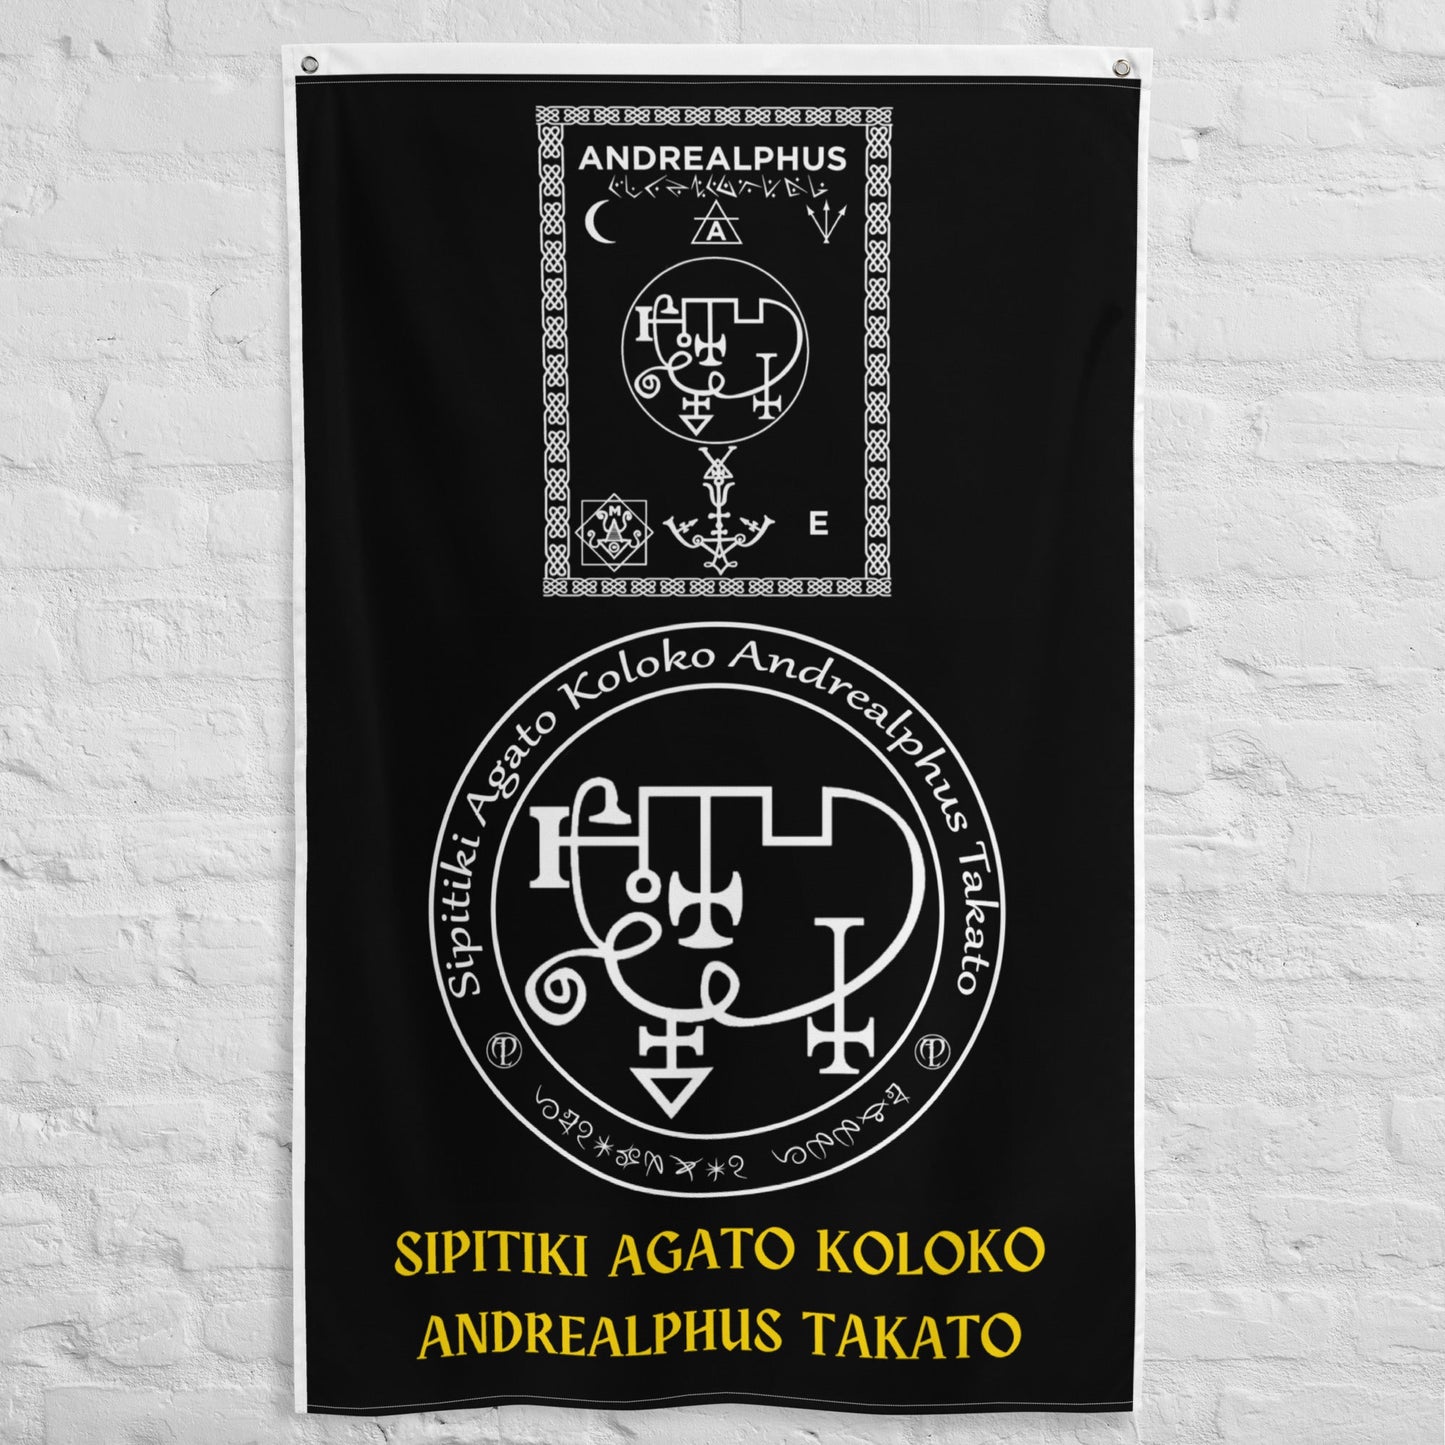 Attunement-Invocation-Flag-of-Spirit-Andrealphus-To-make-your-attunements-and-invocations-easy-and-ces